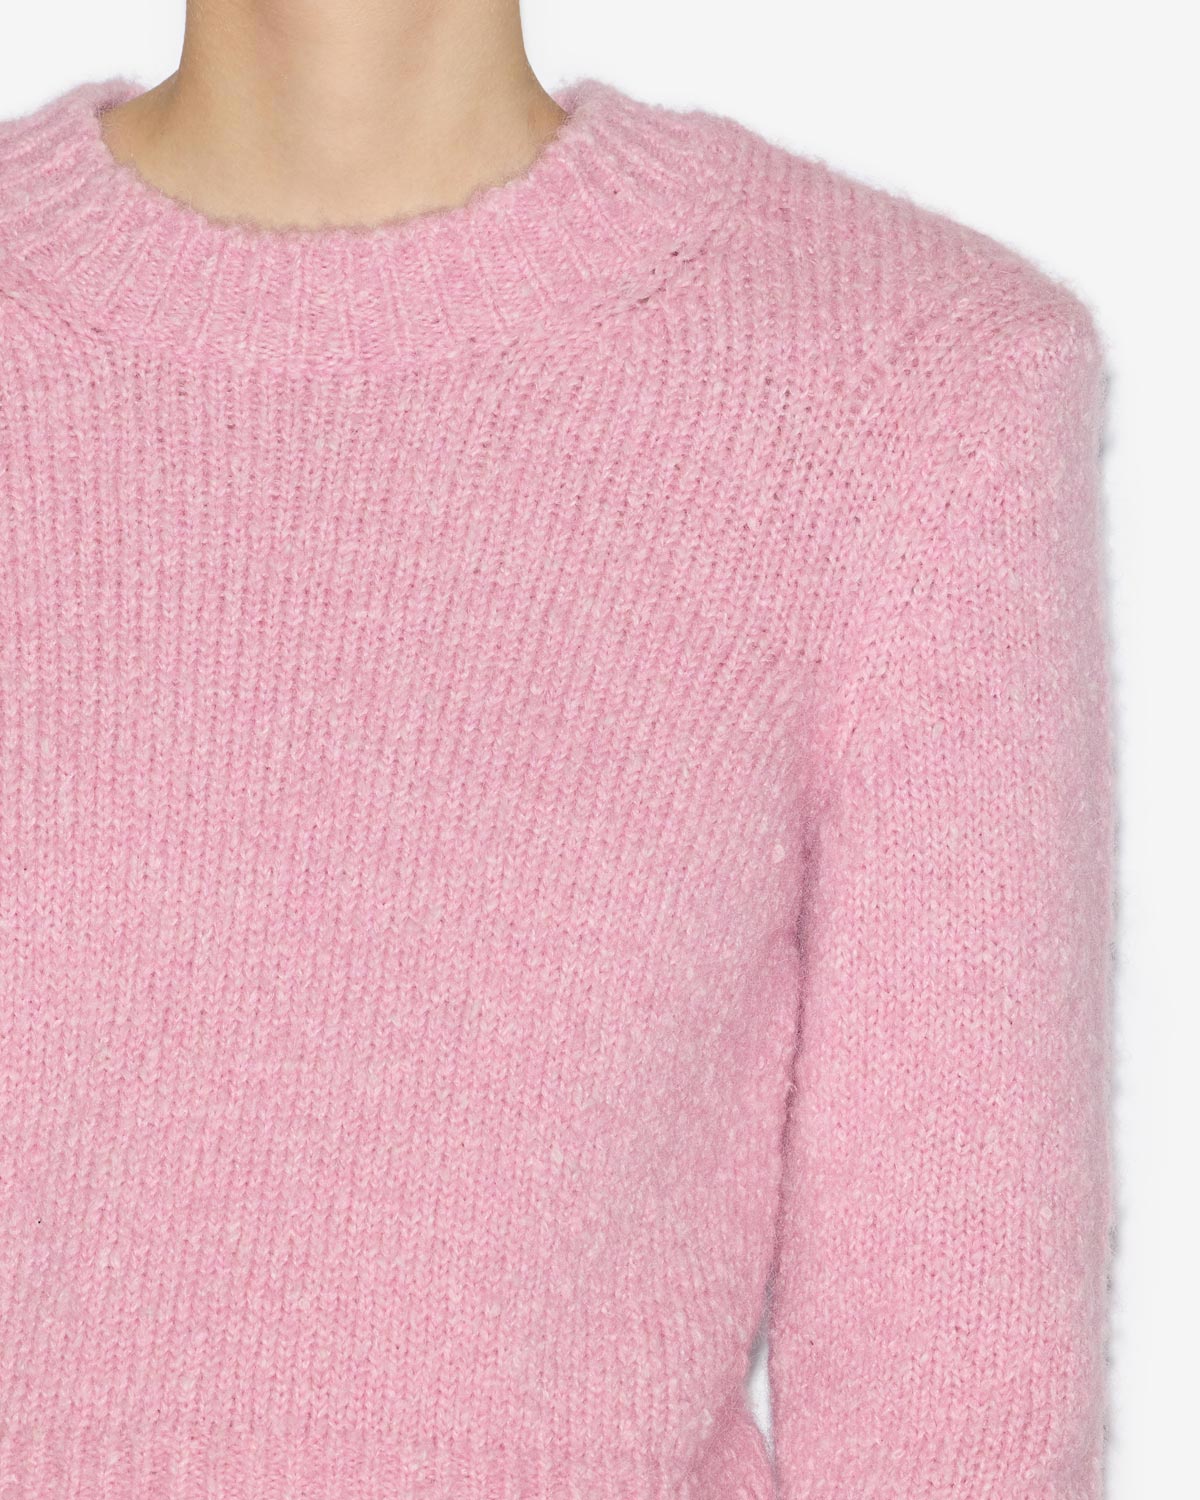 Pullover kalo Woman Light pink 2